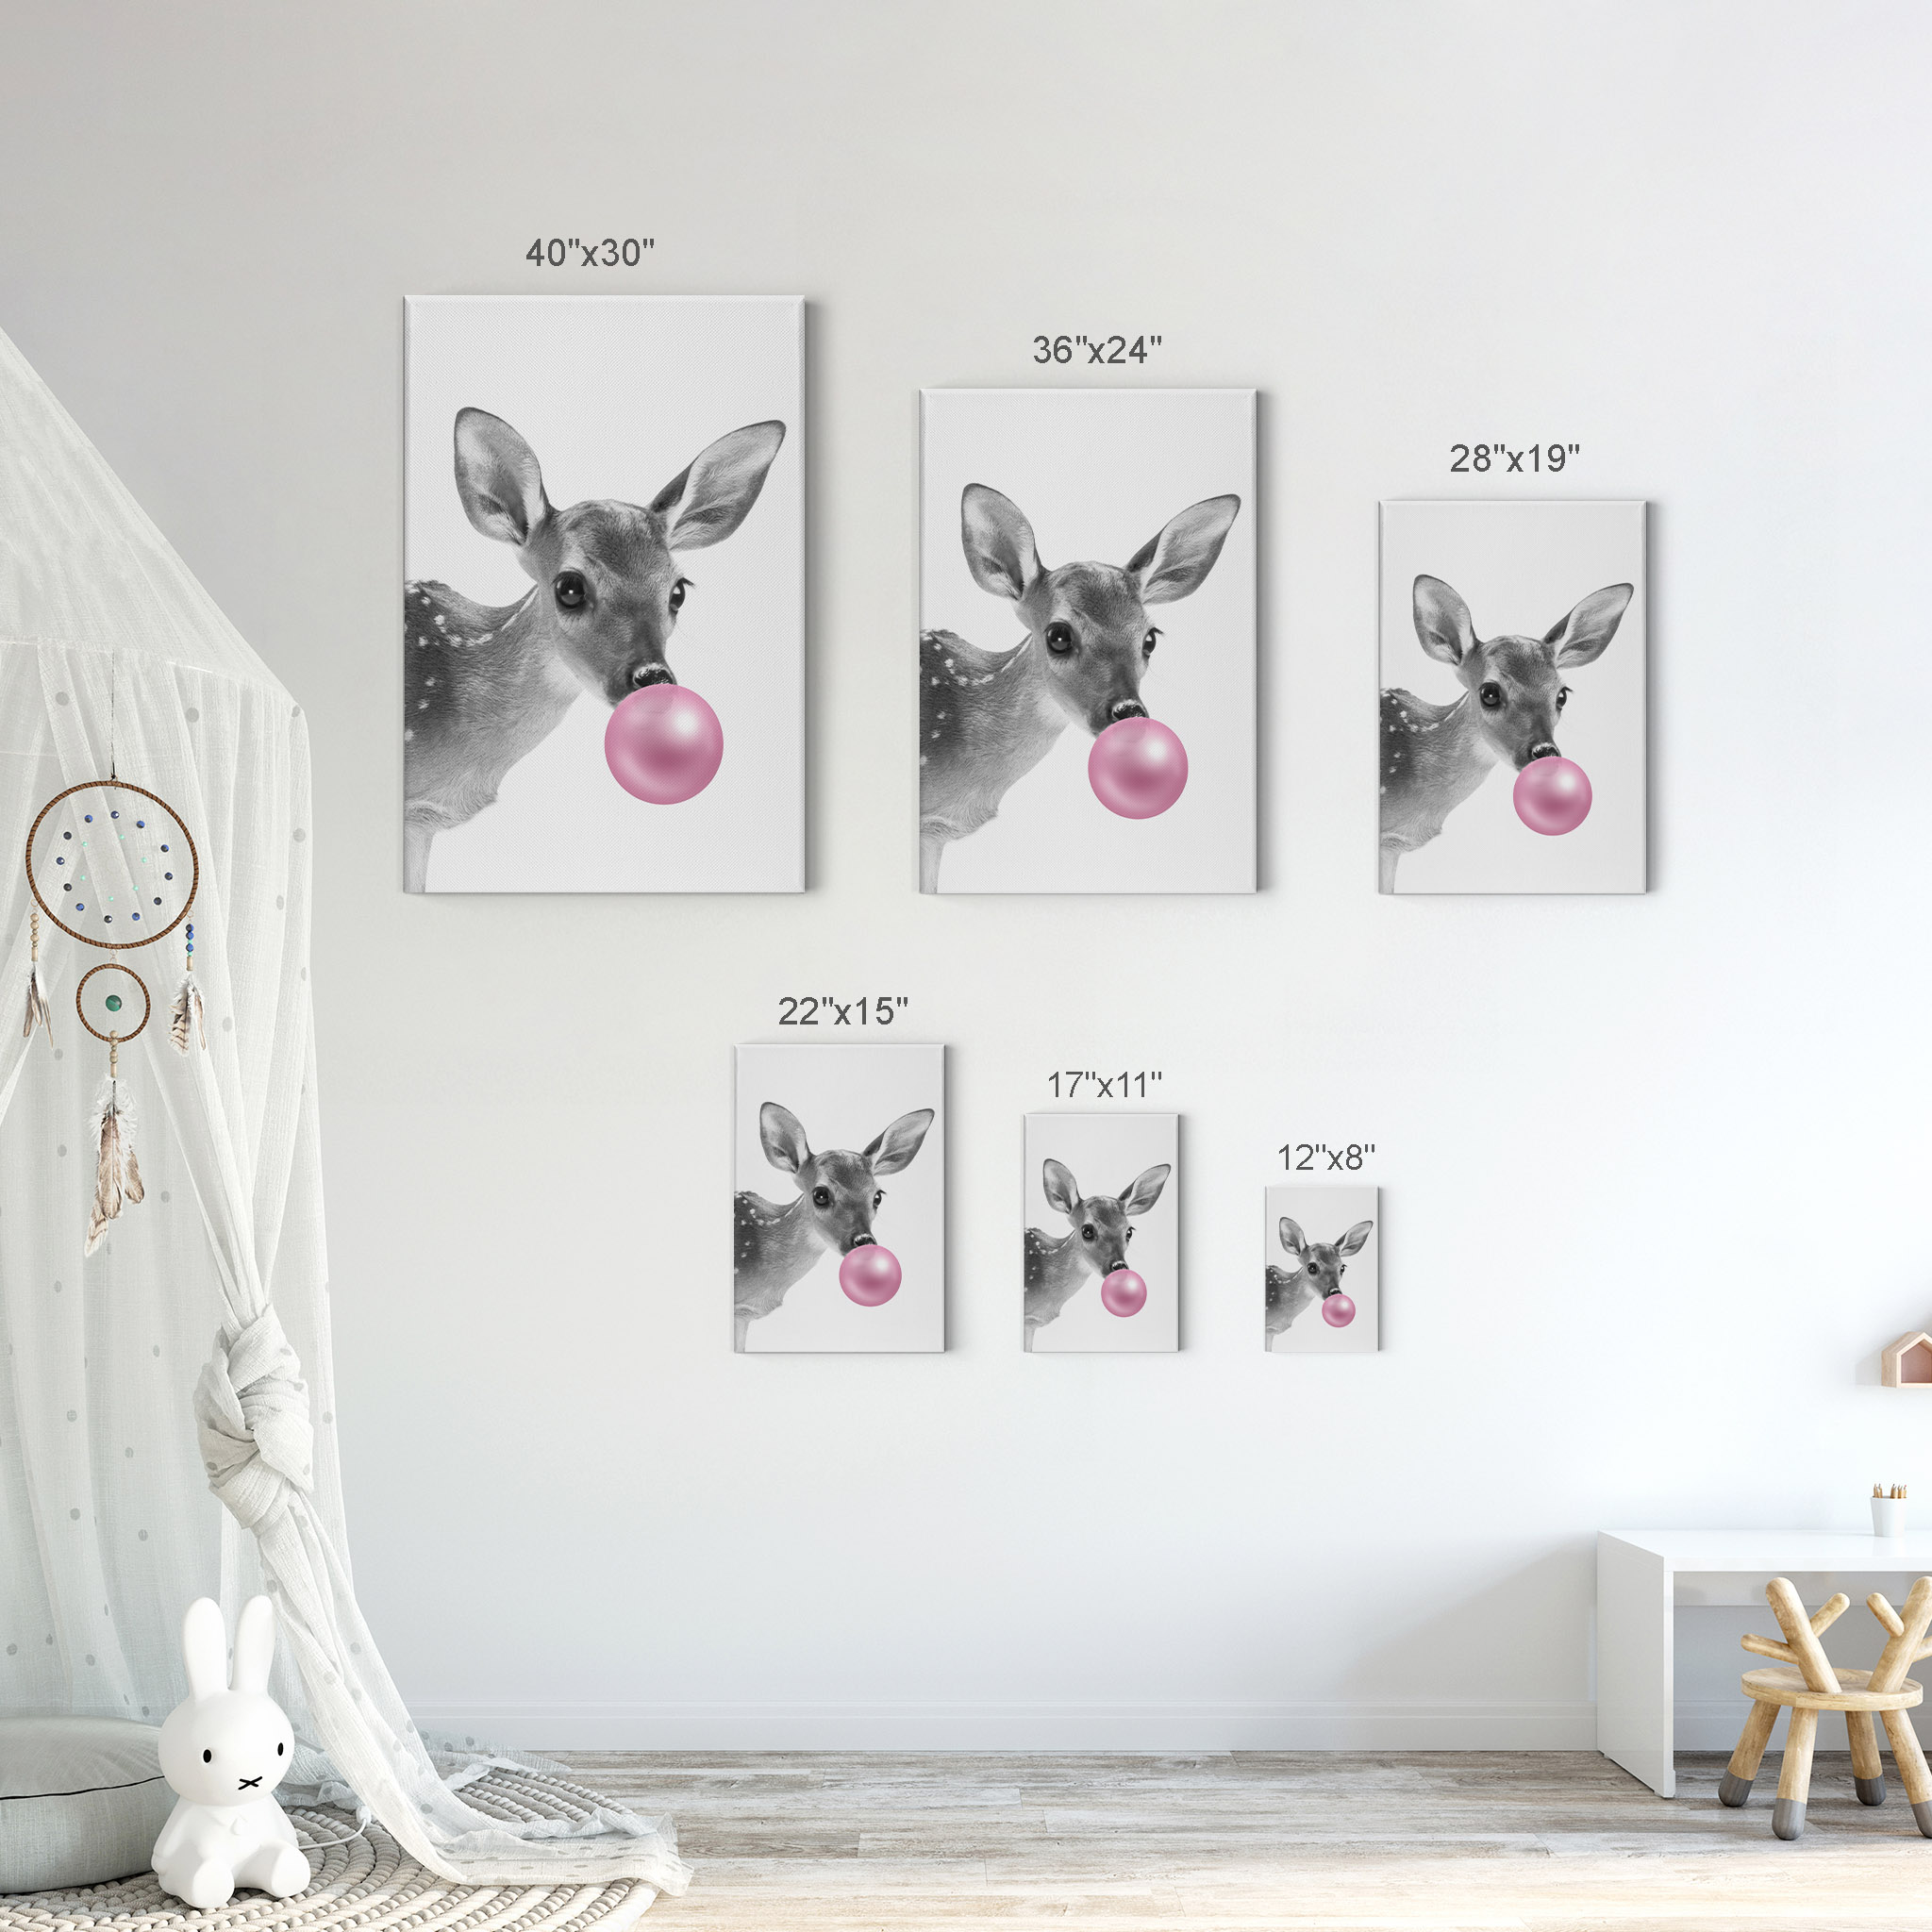 Smile Art Design Baby Deer Animal Bubble Gum Art Pink CANVAS PRINT Black  and White Wall Art Home Decoration Pop Art Living Room Kids Room Decor  Nursery Ready to Hang Made in